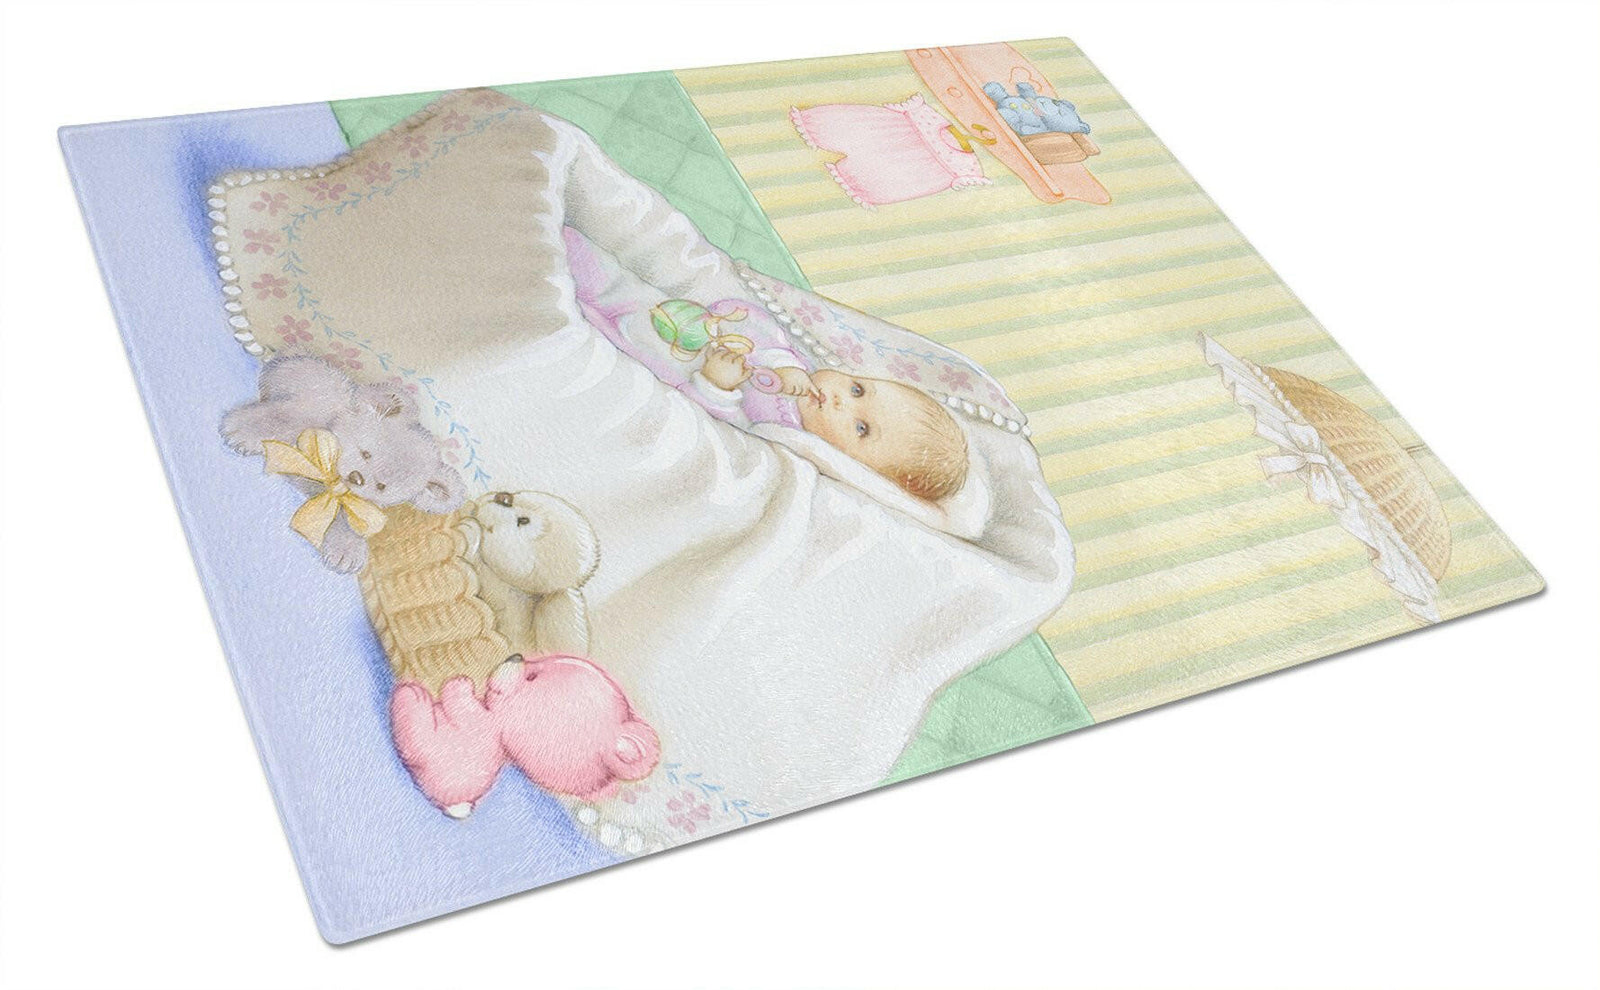 New Baby in Crib Glass Cutting Board Large APH7093LCB by Caroline's Treasures